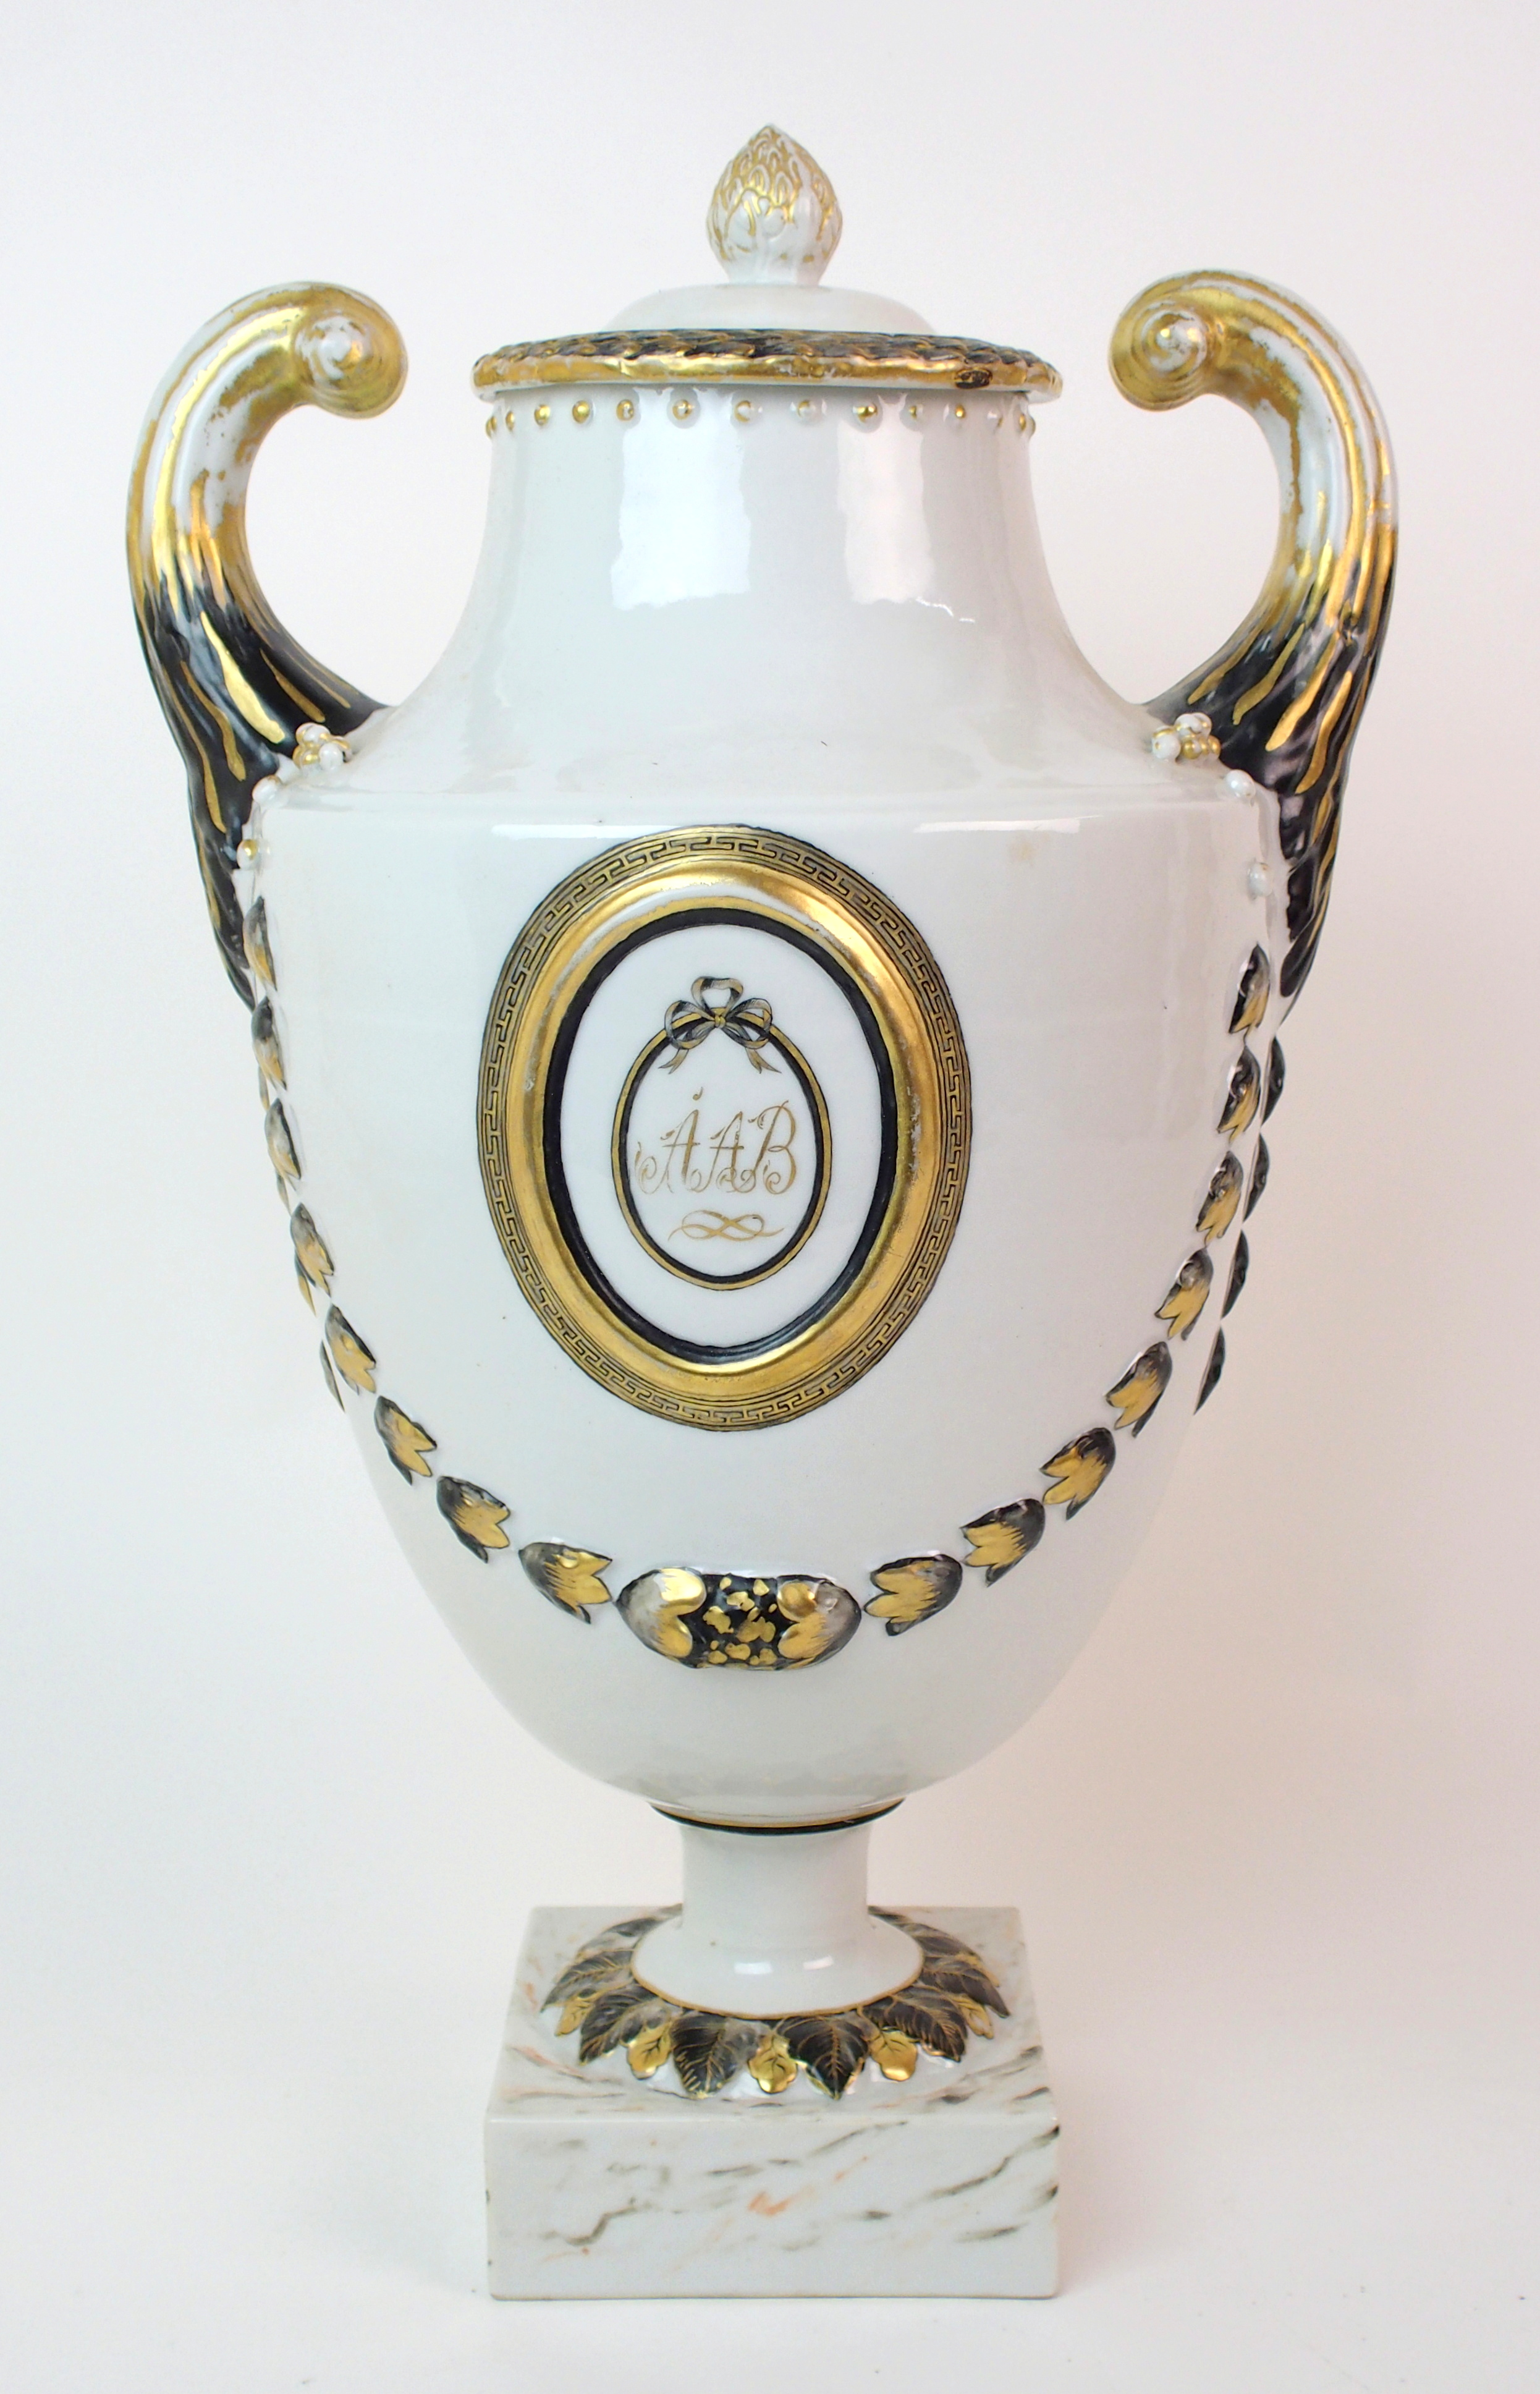 A Chinese export Neo classical two-handled urn and cover with bud finial laurel wreath, scroll